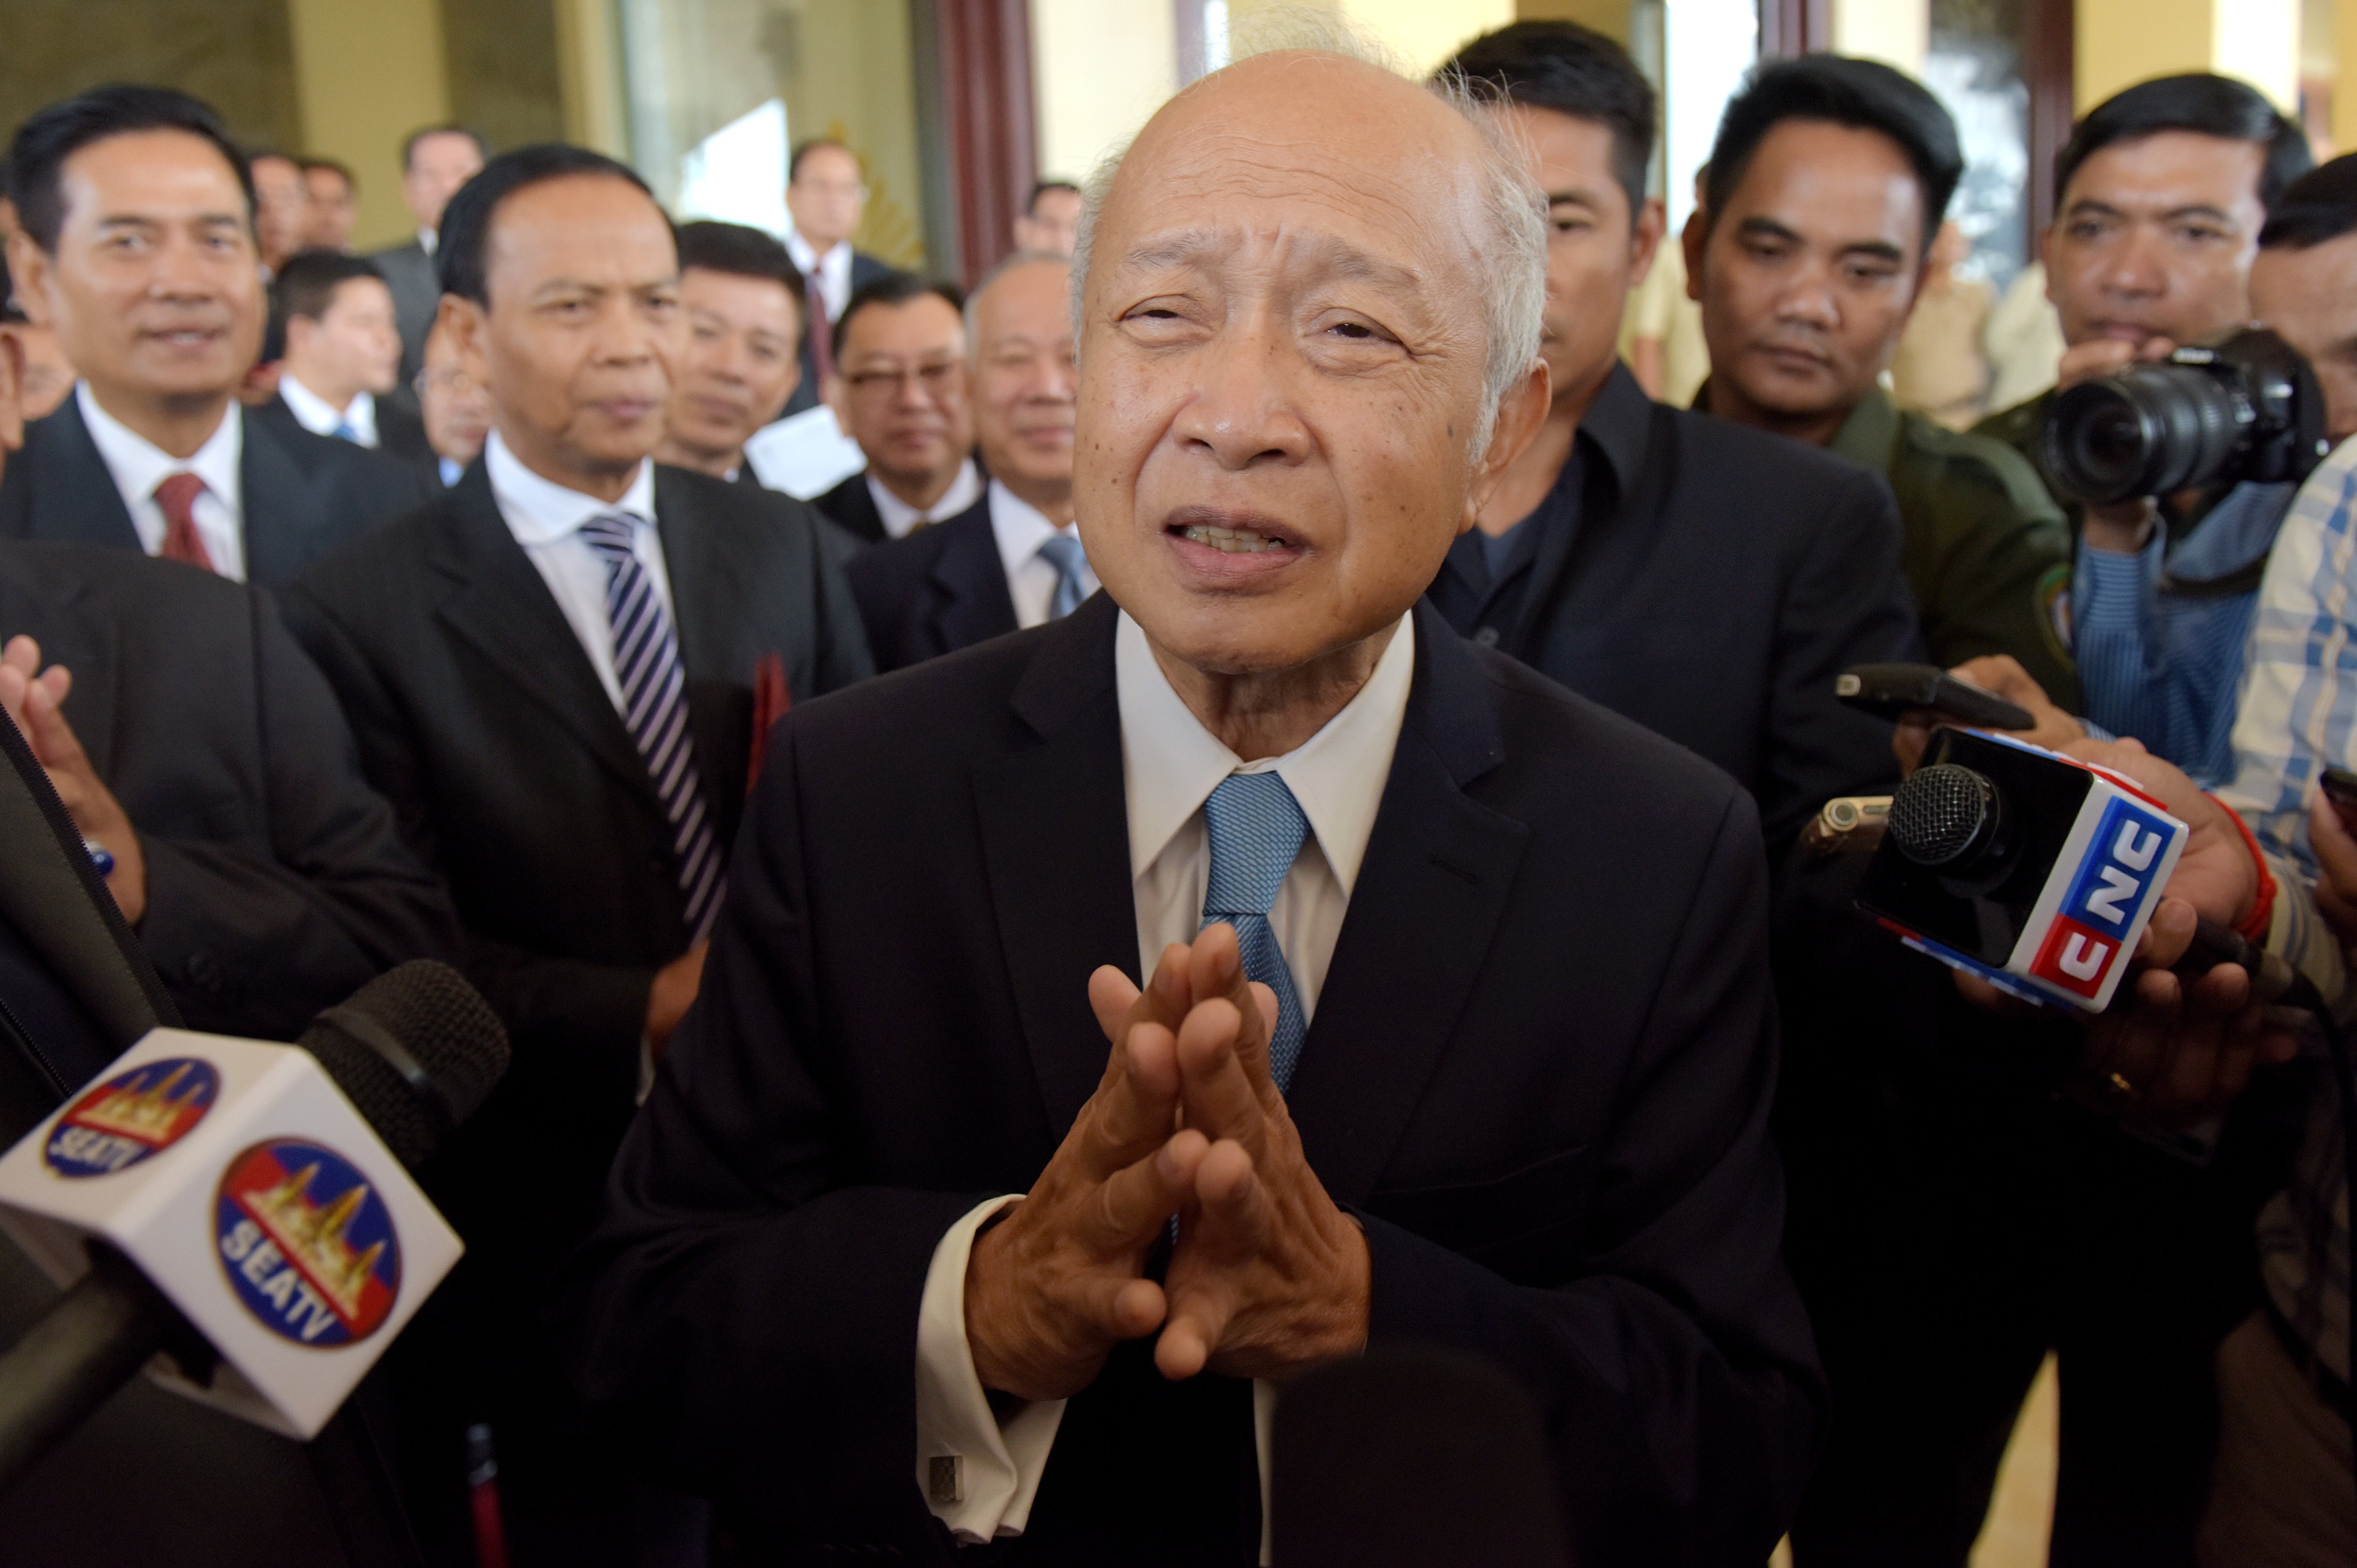 Cambodia's Prince Norodom Ranariddh at the National Assembly building in Phnom Penh on Nov. 27, 2017. (Tang Chhin Sothy&mdash;AFP/Getty Images)